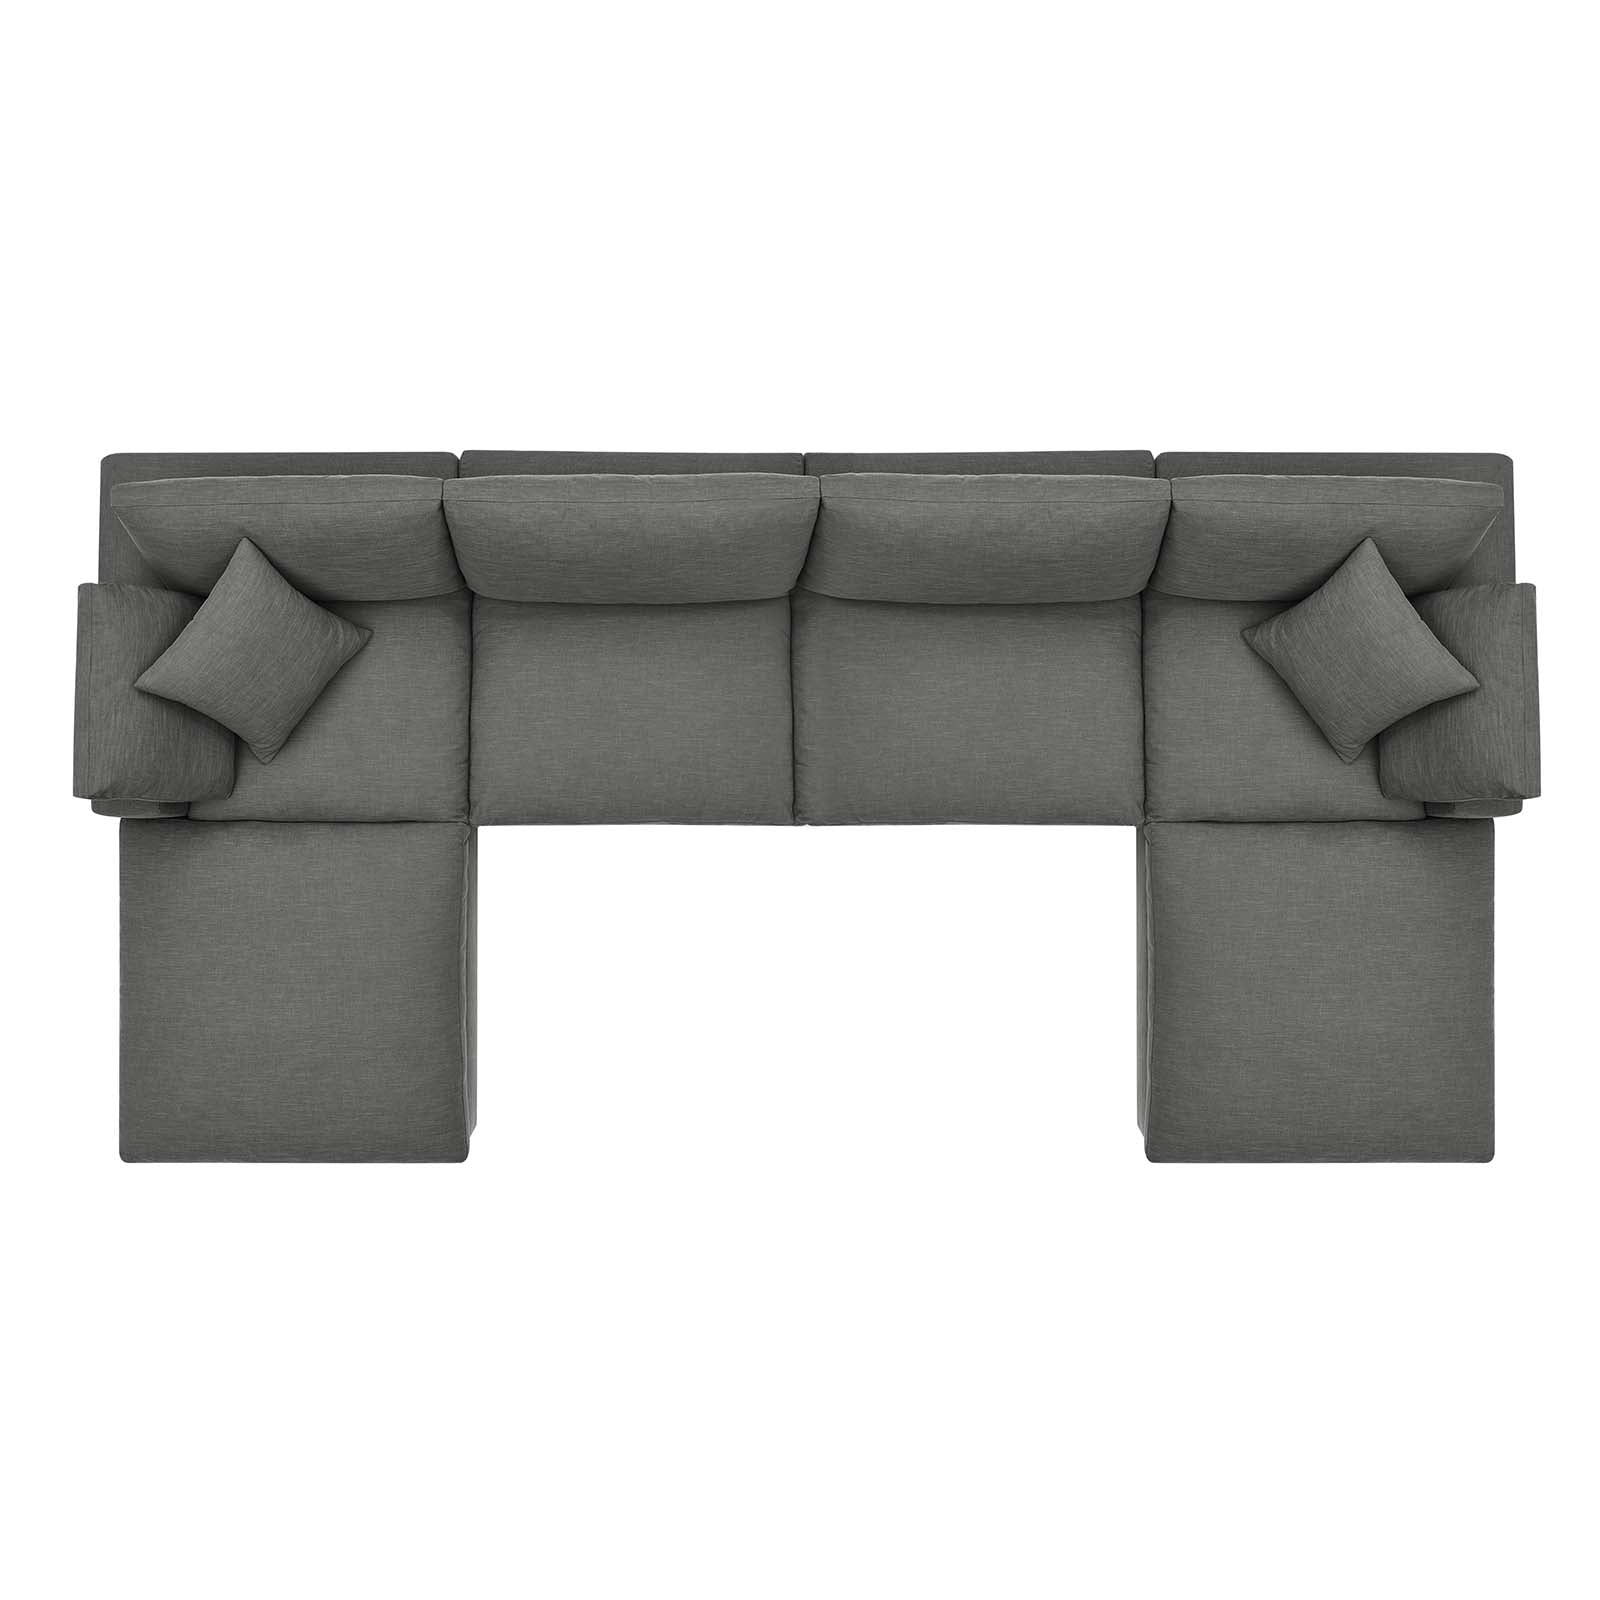 Modway Living Room Sets - Commix Down Filled Overstuffed 6 Piece Sectional Sofa Set Gray